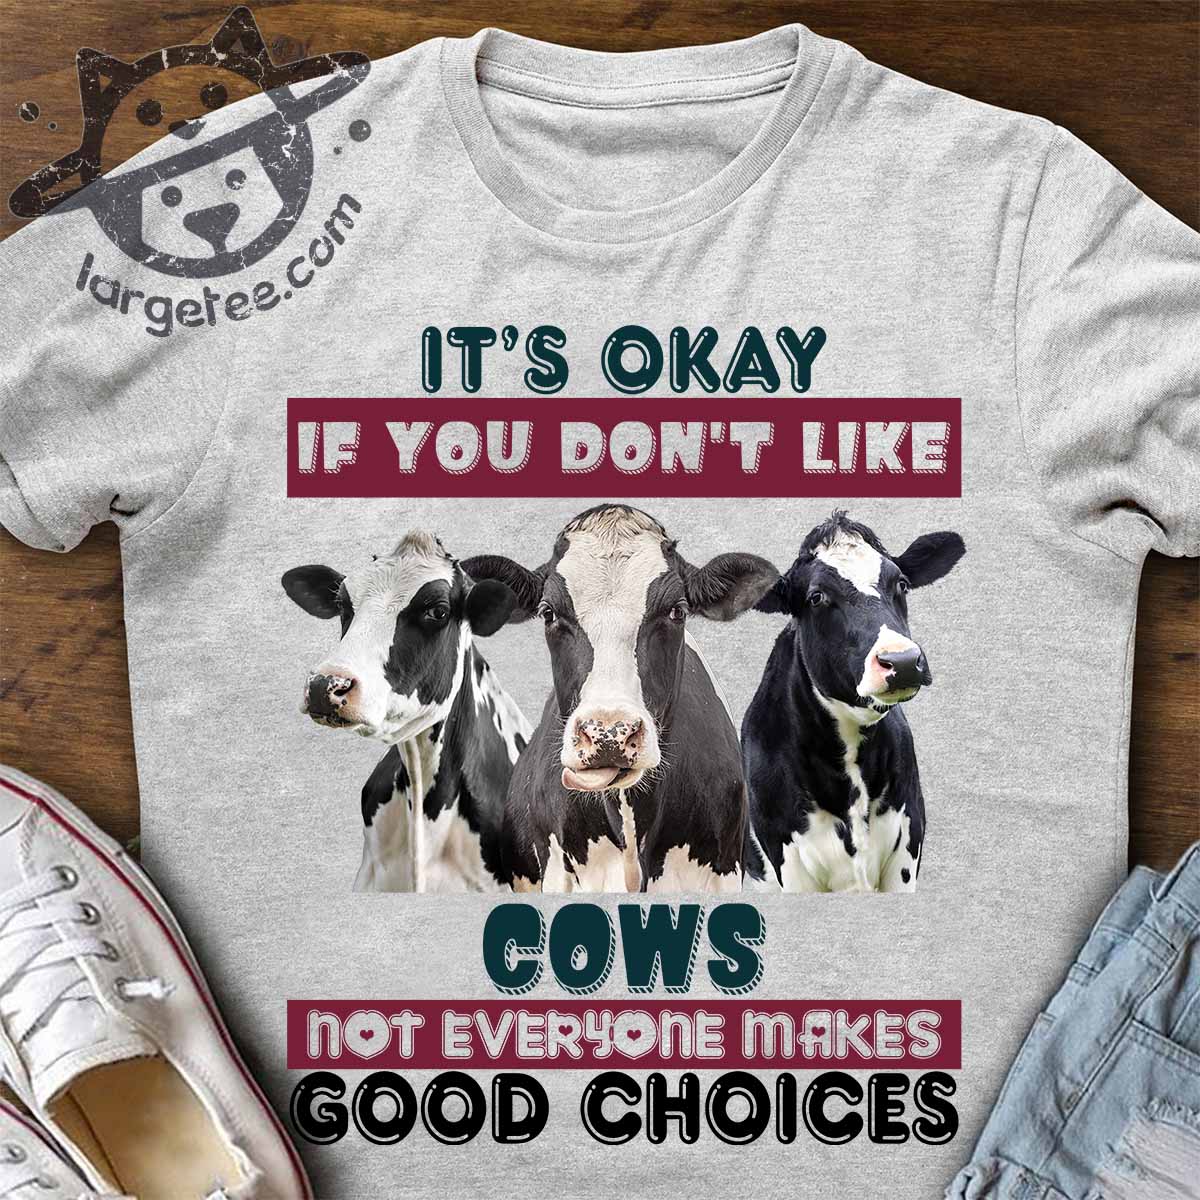 It's okay if you don't like cows not everyone makes good choices